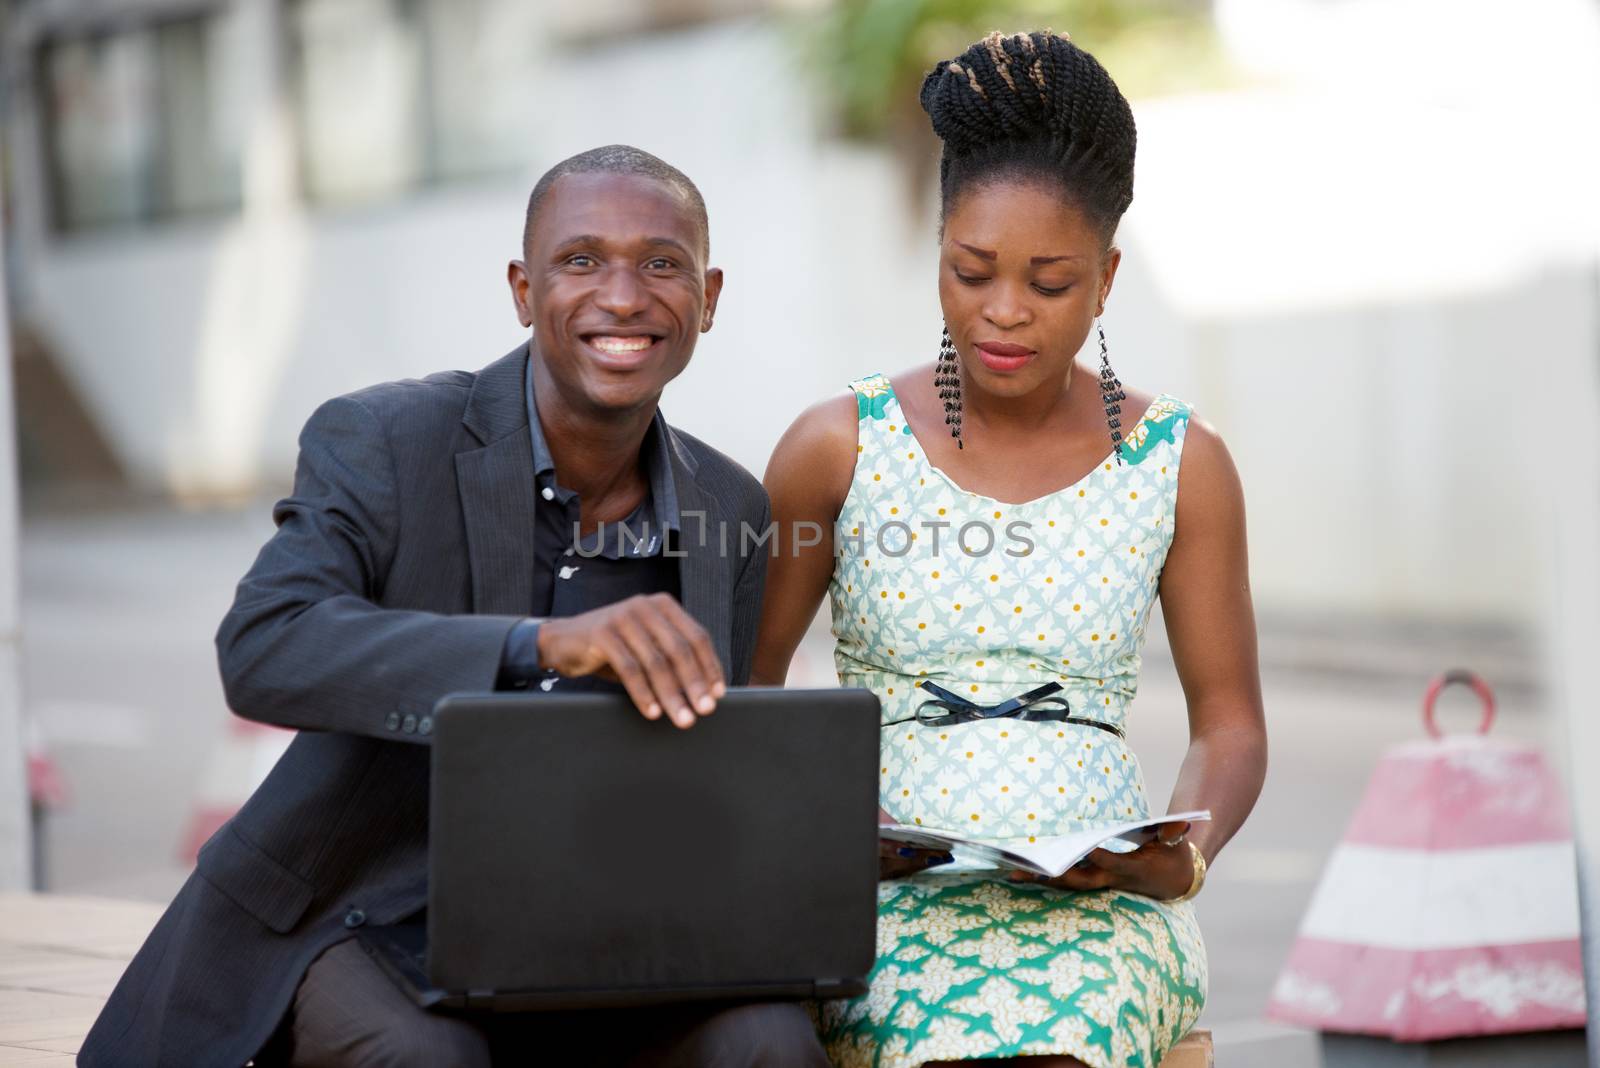 Business people sitting out laughing and working together on a laptop.